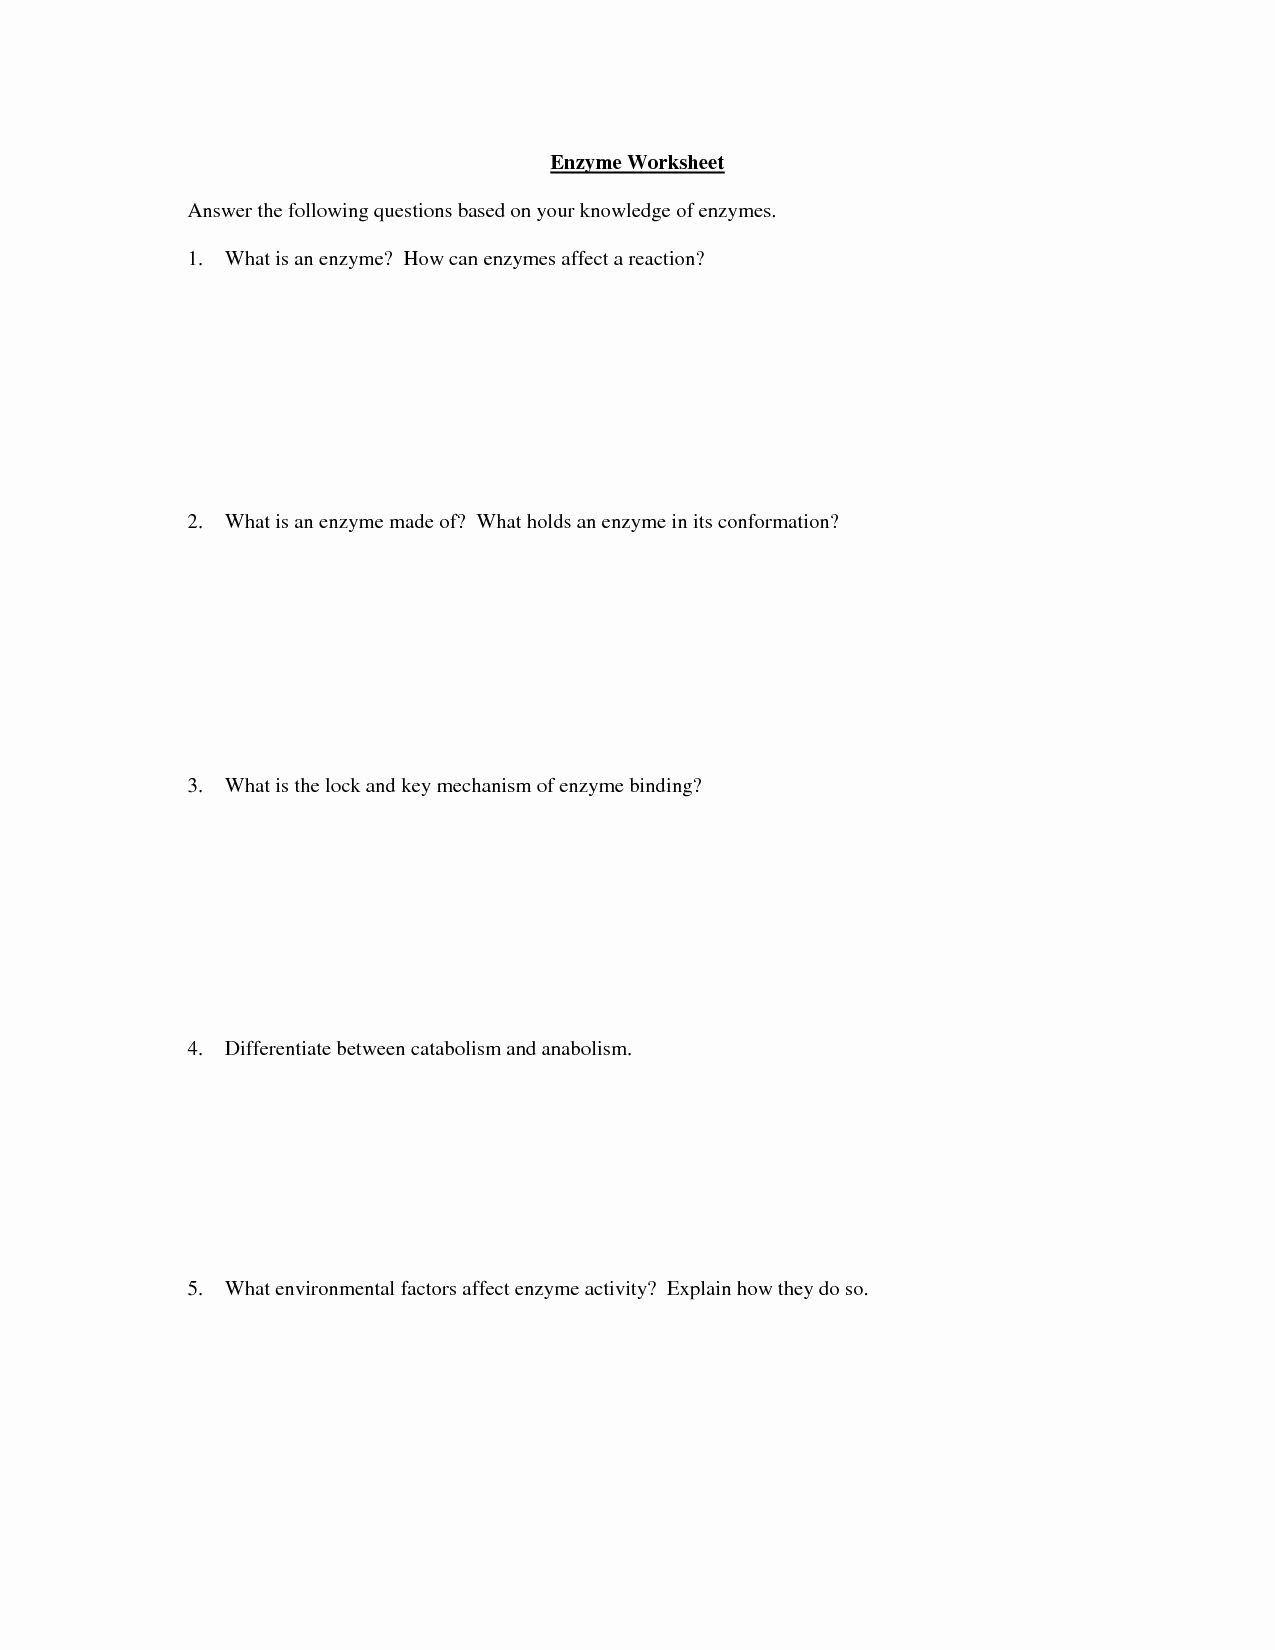 Enzyme Reactions Worksheet Answer Key Enzyme Reactions Worksheet Answer Key Luxury 12 Best